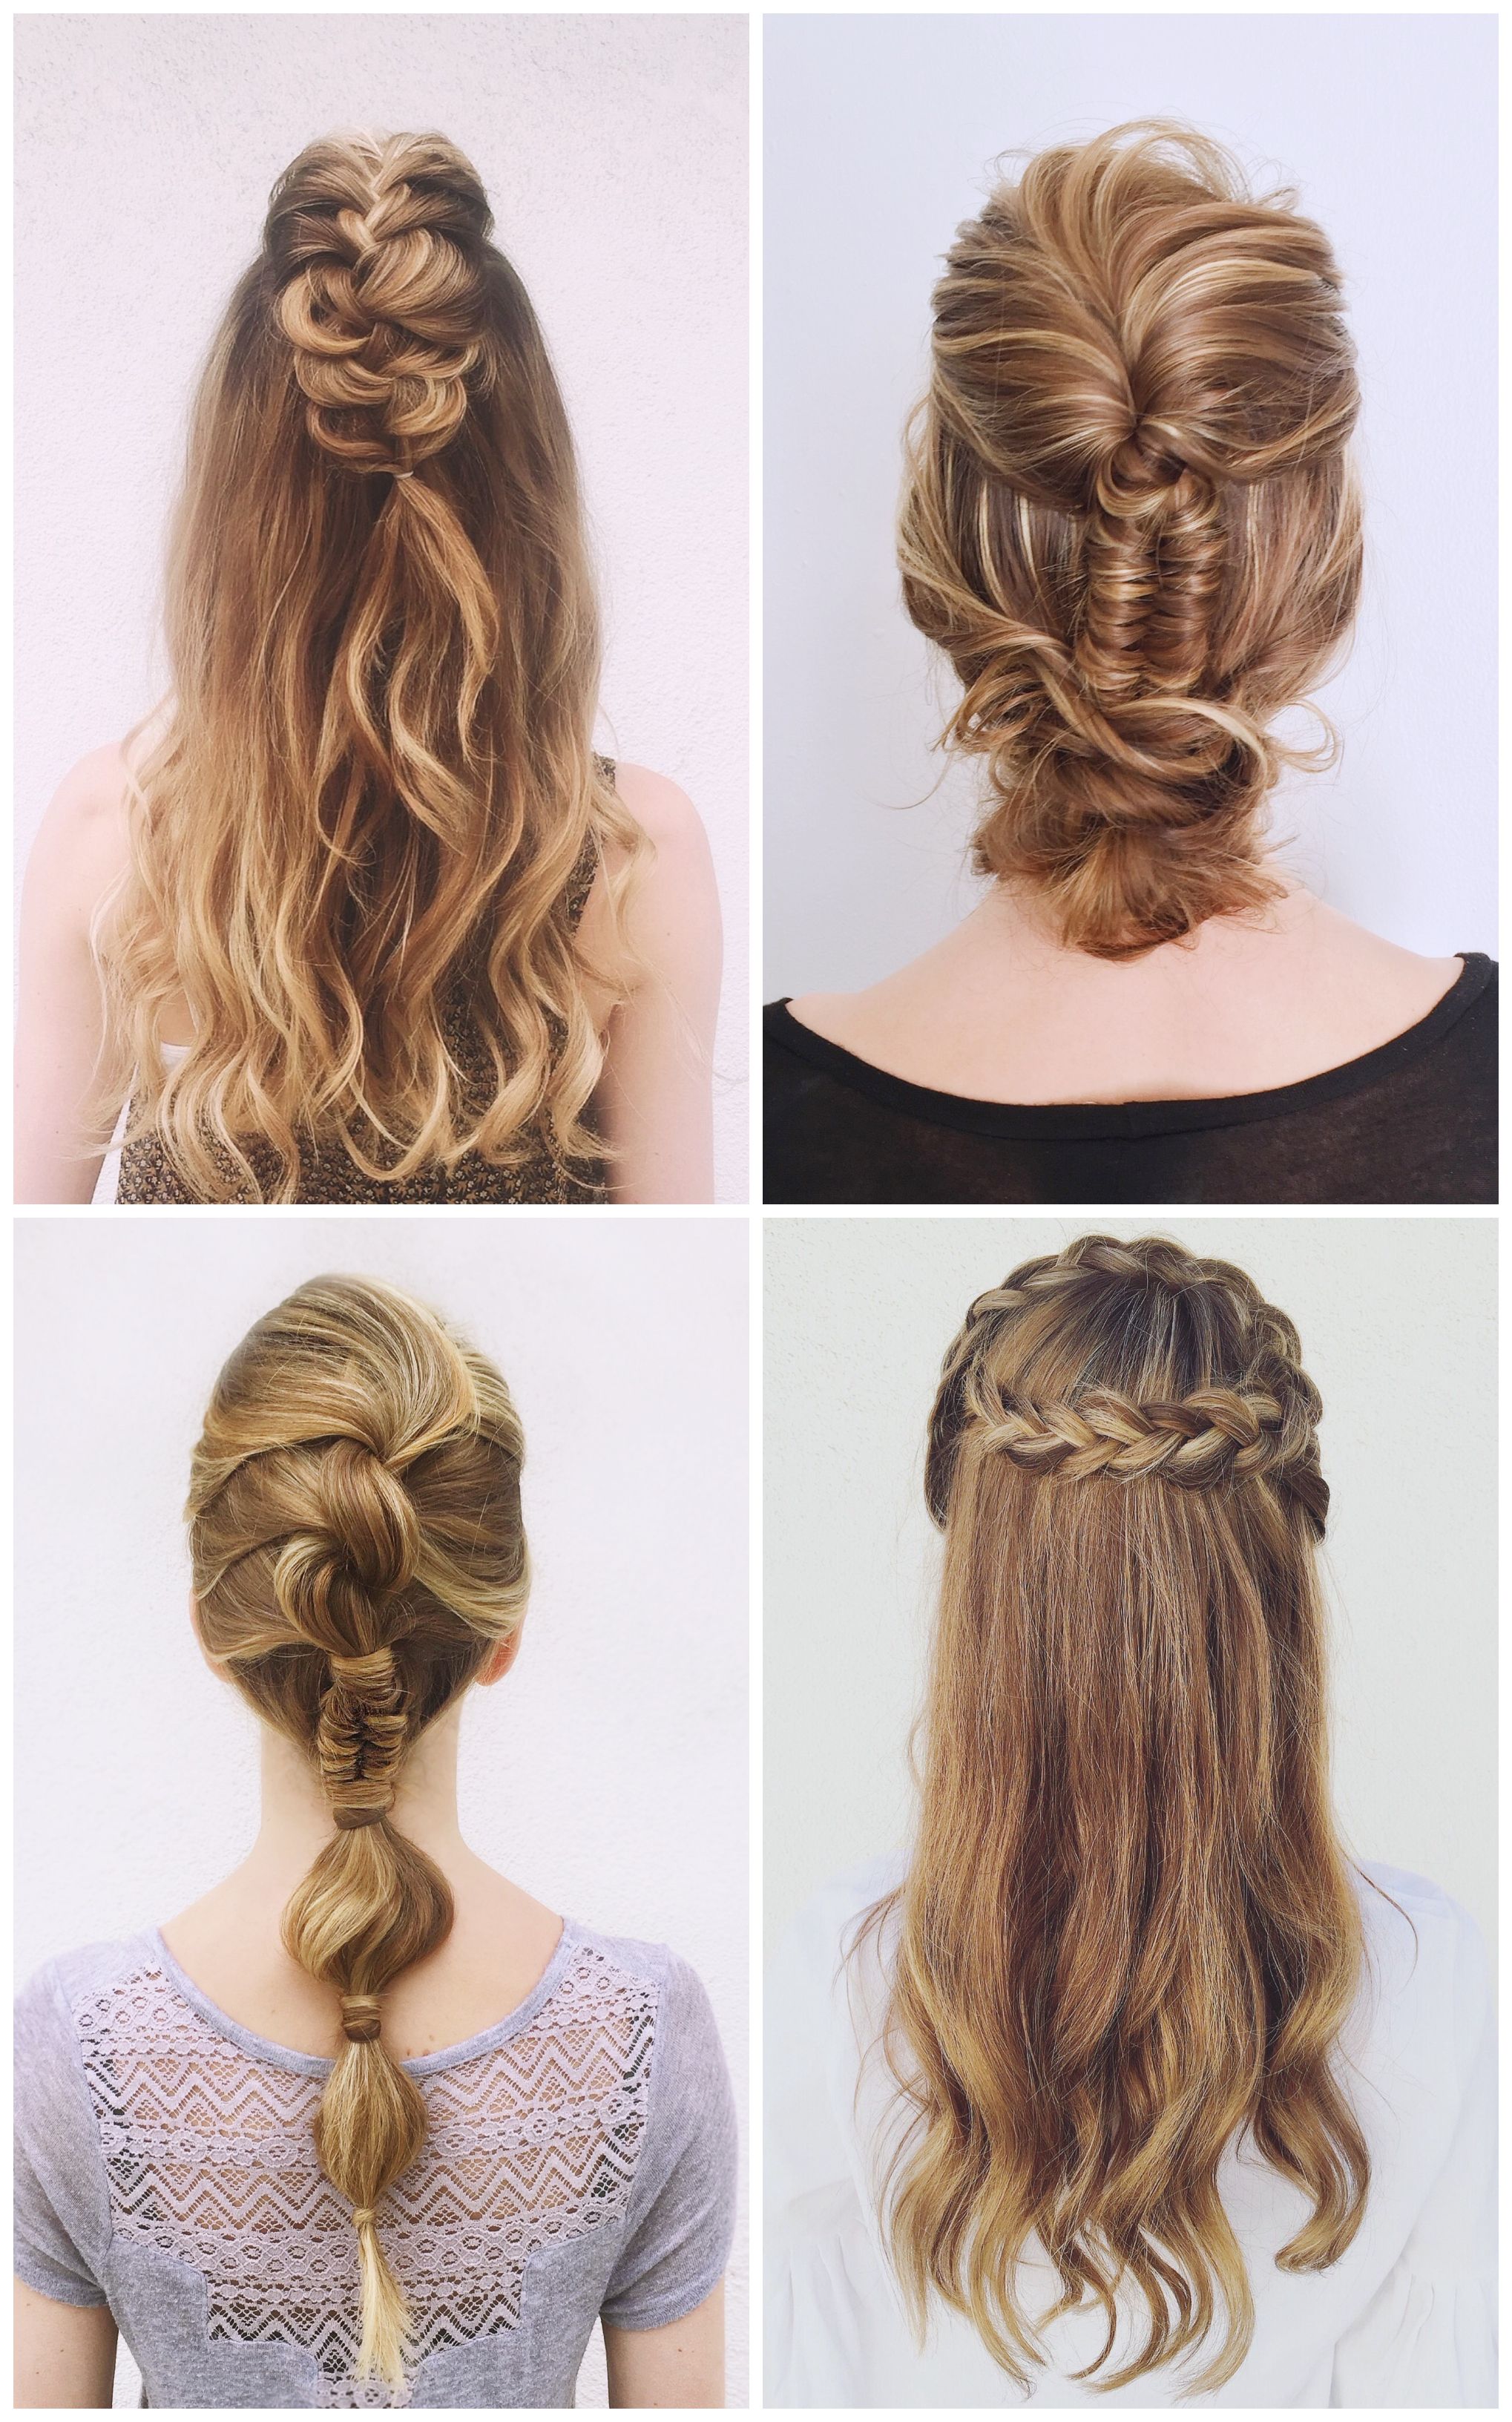 20 Braided Prom Hairstyles For Stylish Girls Intended For Most Current Formal Dutch Fishtail Prom Updos (View 2 of 20)